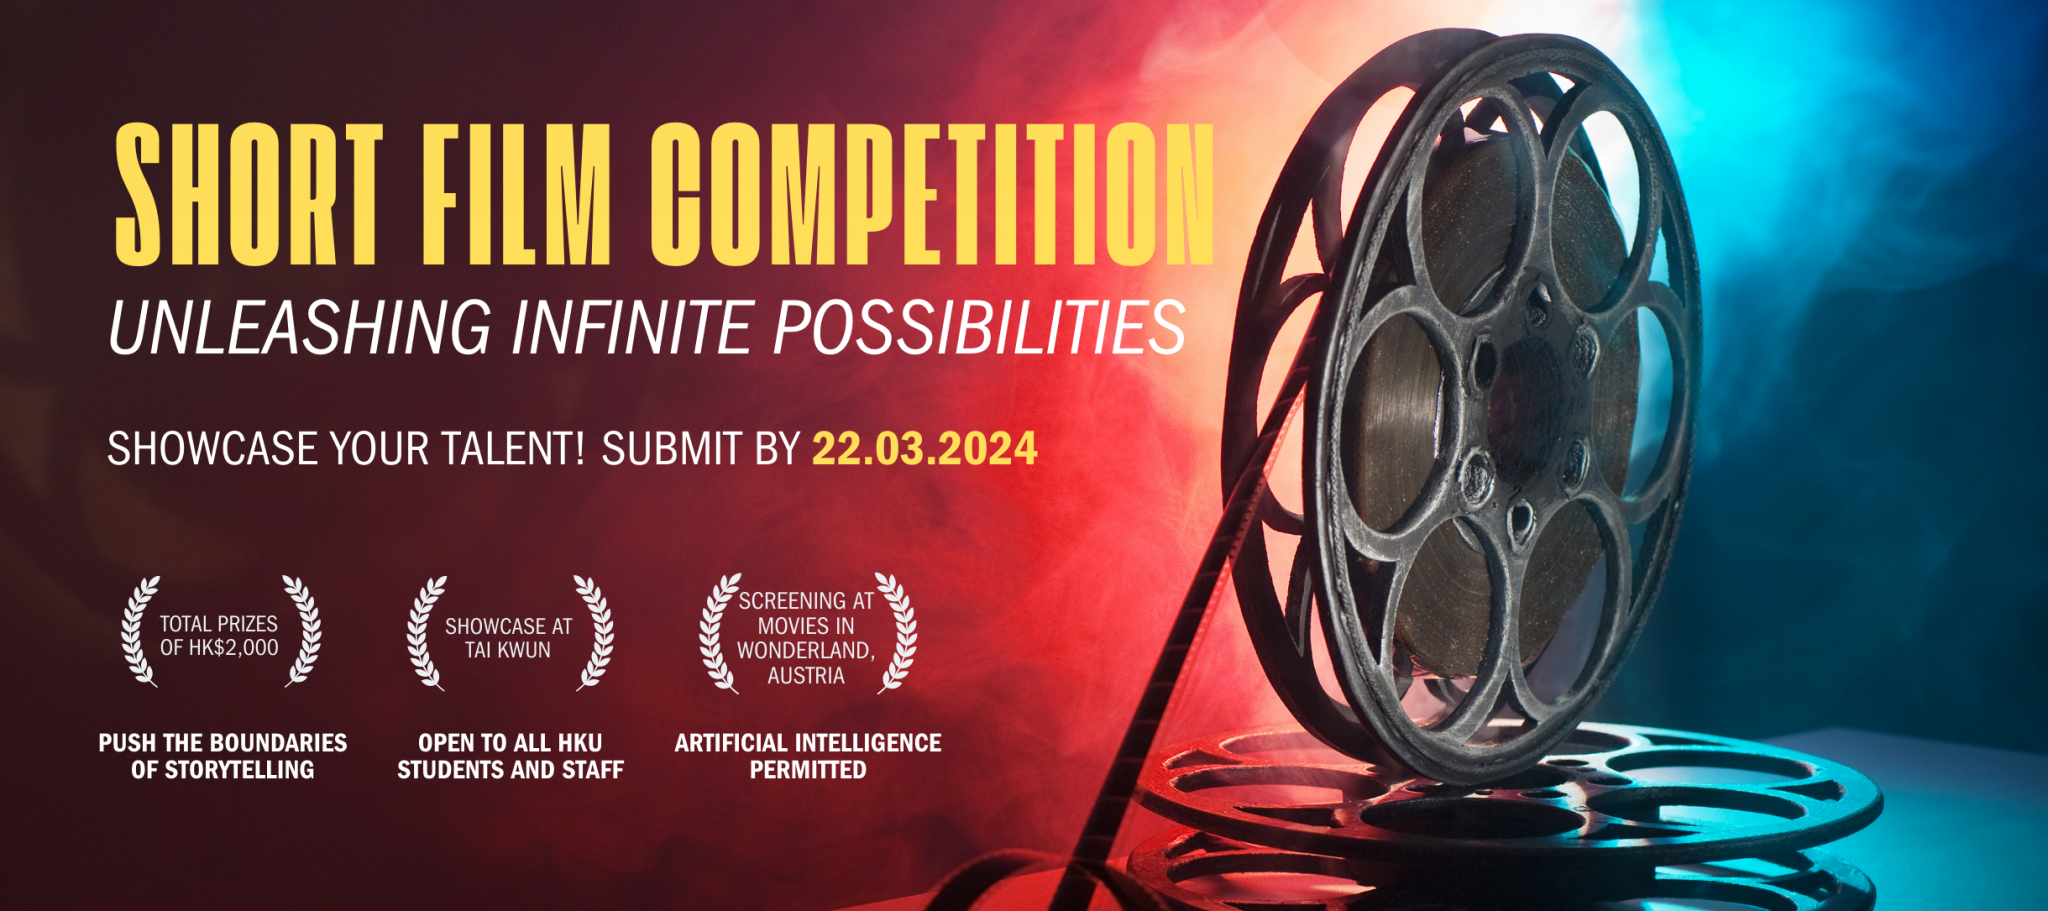 Short Film Competition banner (2439 x 1085 px)